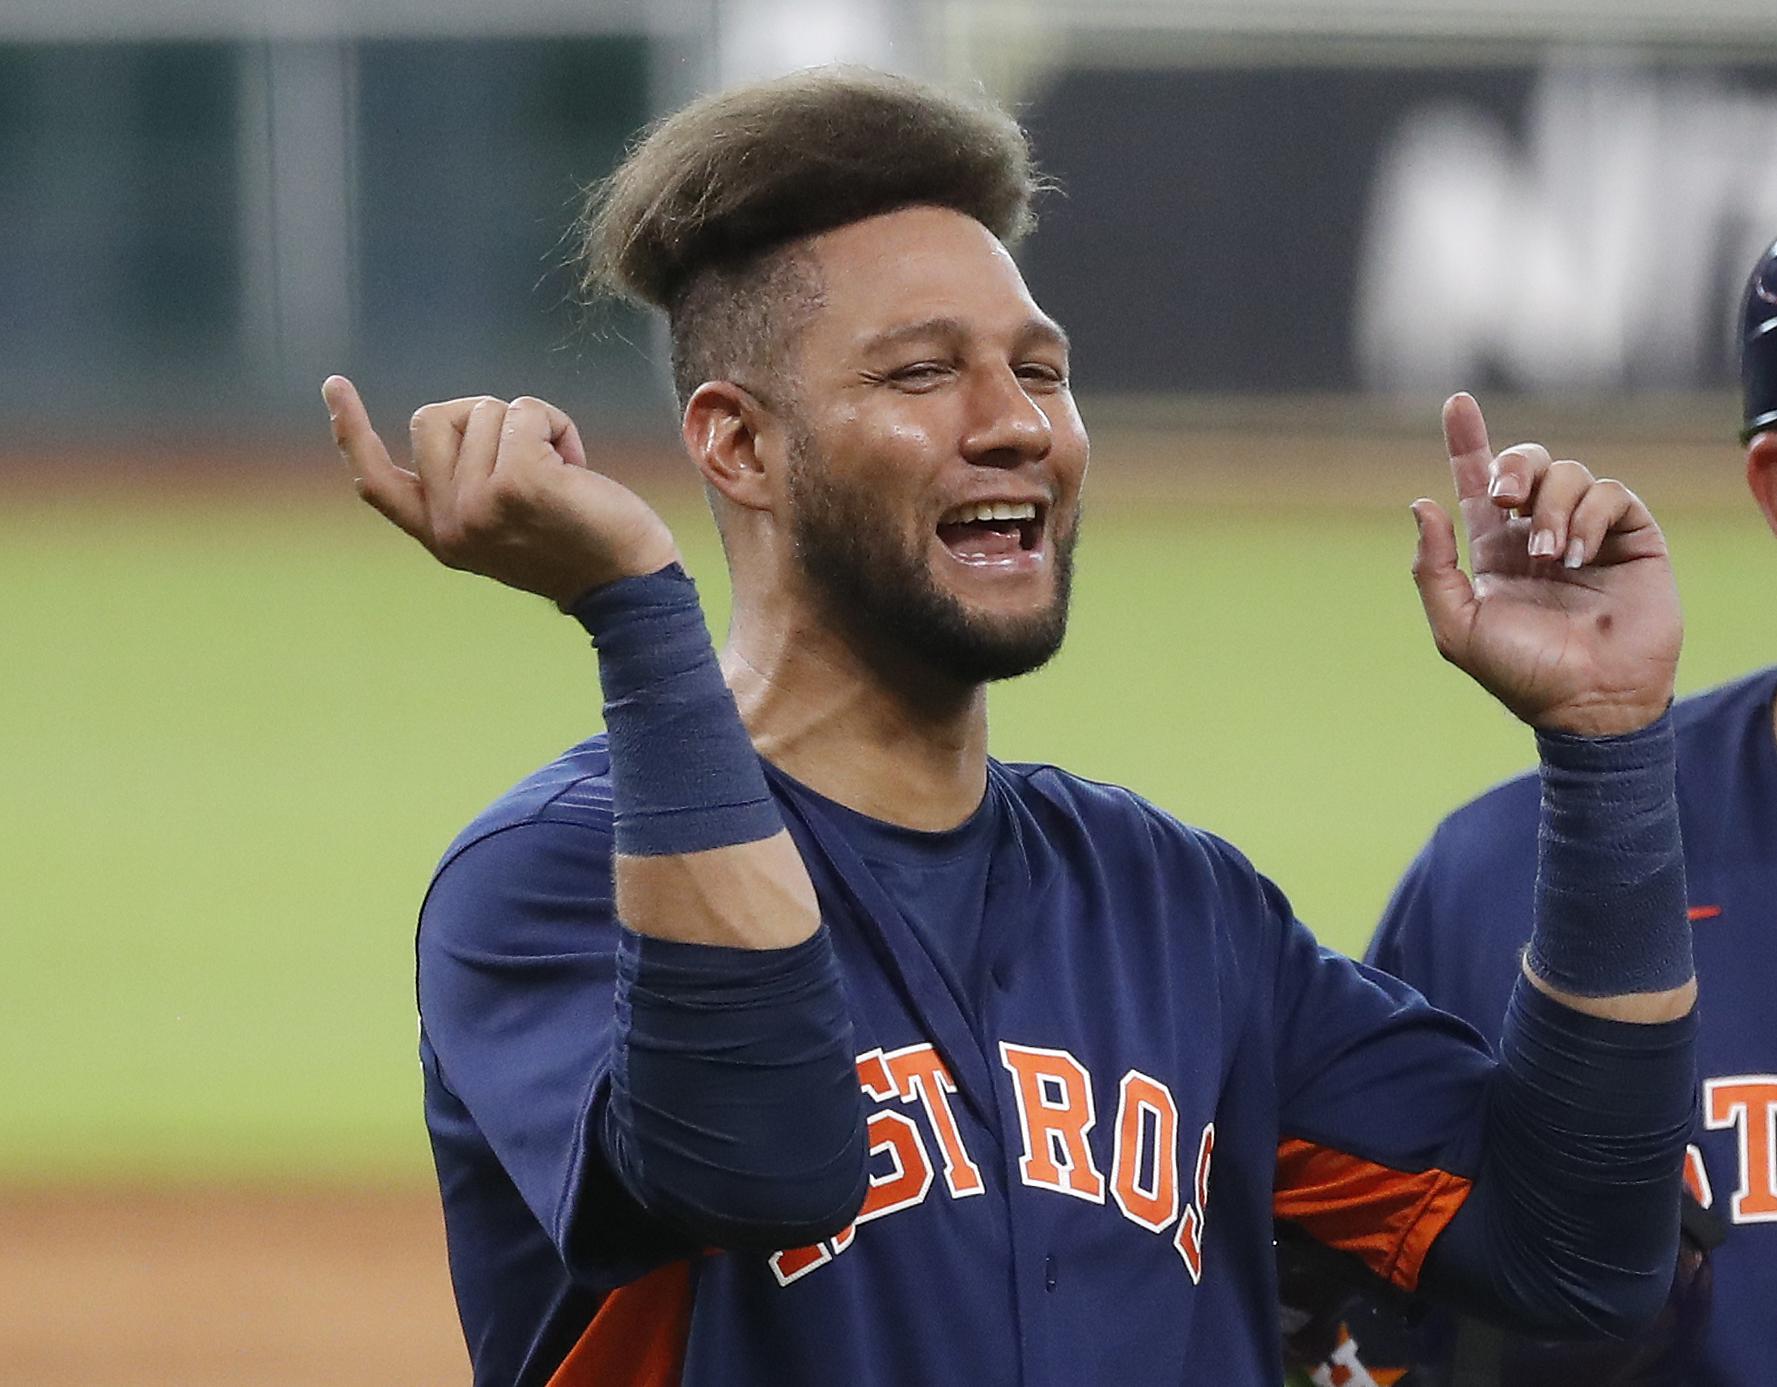 Yuli Gurriel: 5 Fast Facts You Need to Know